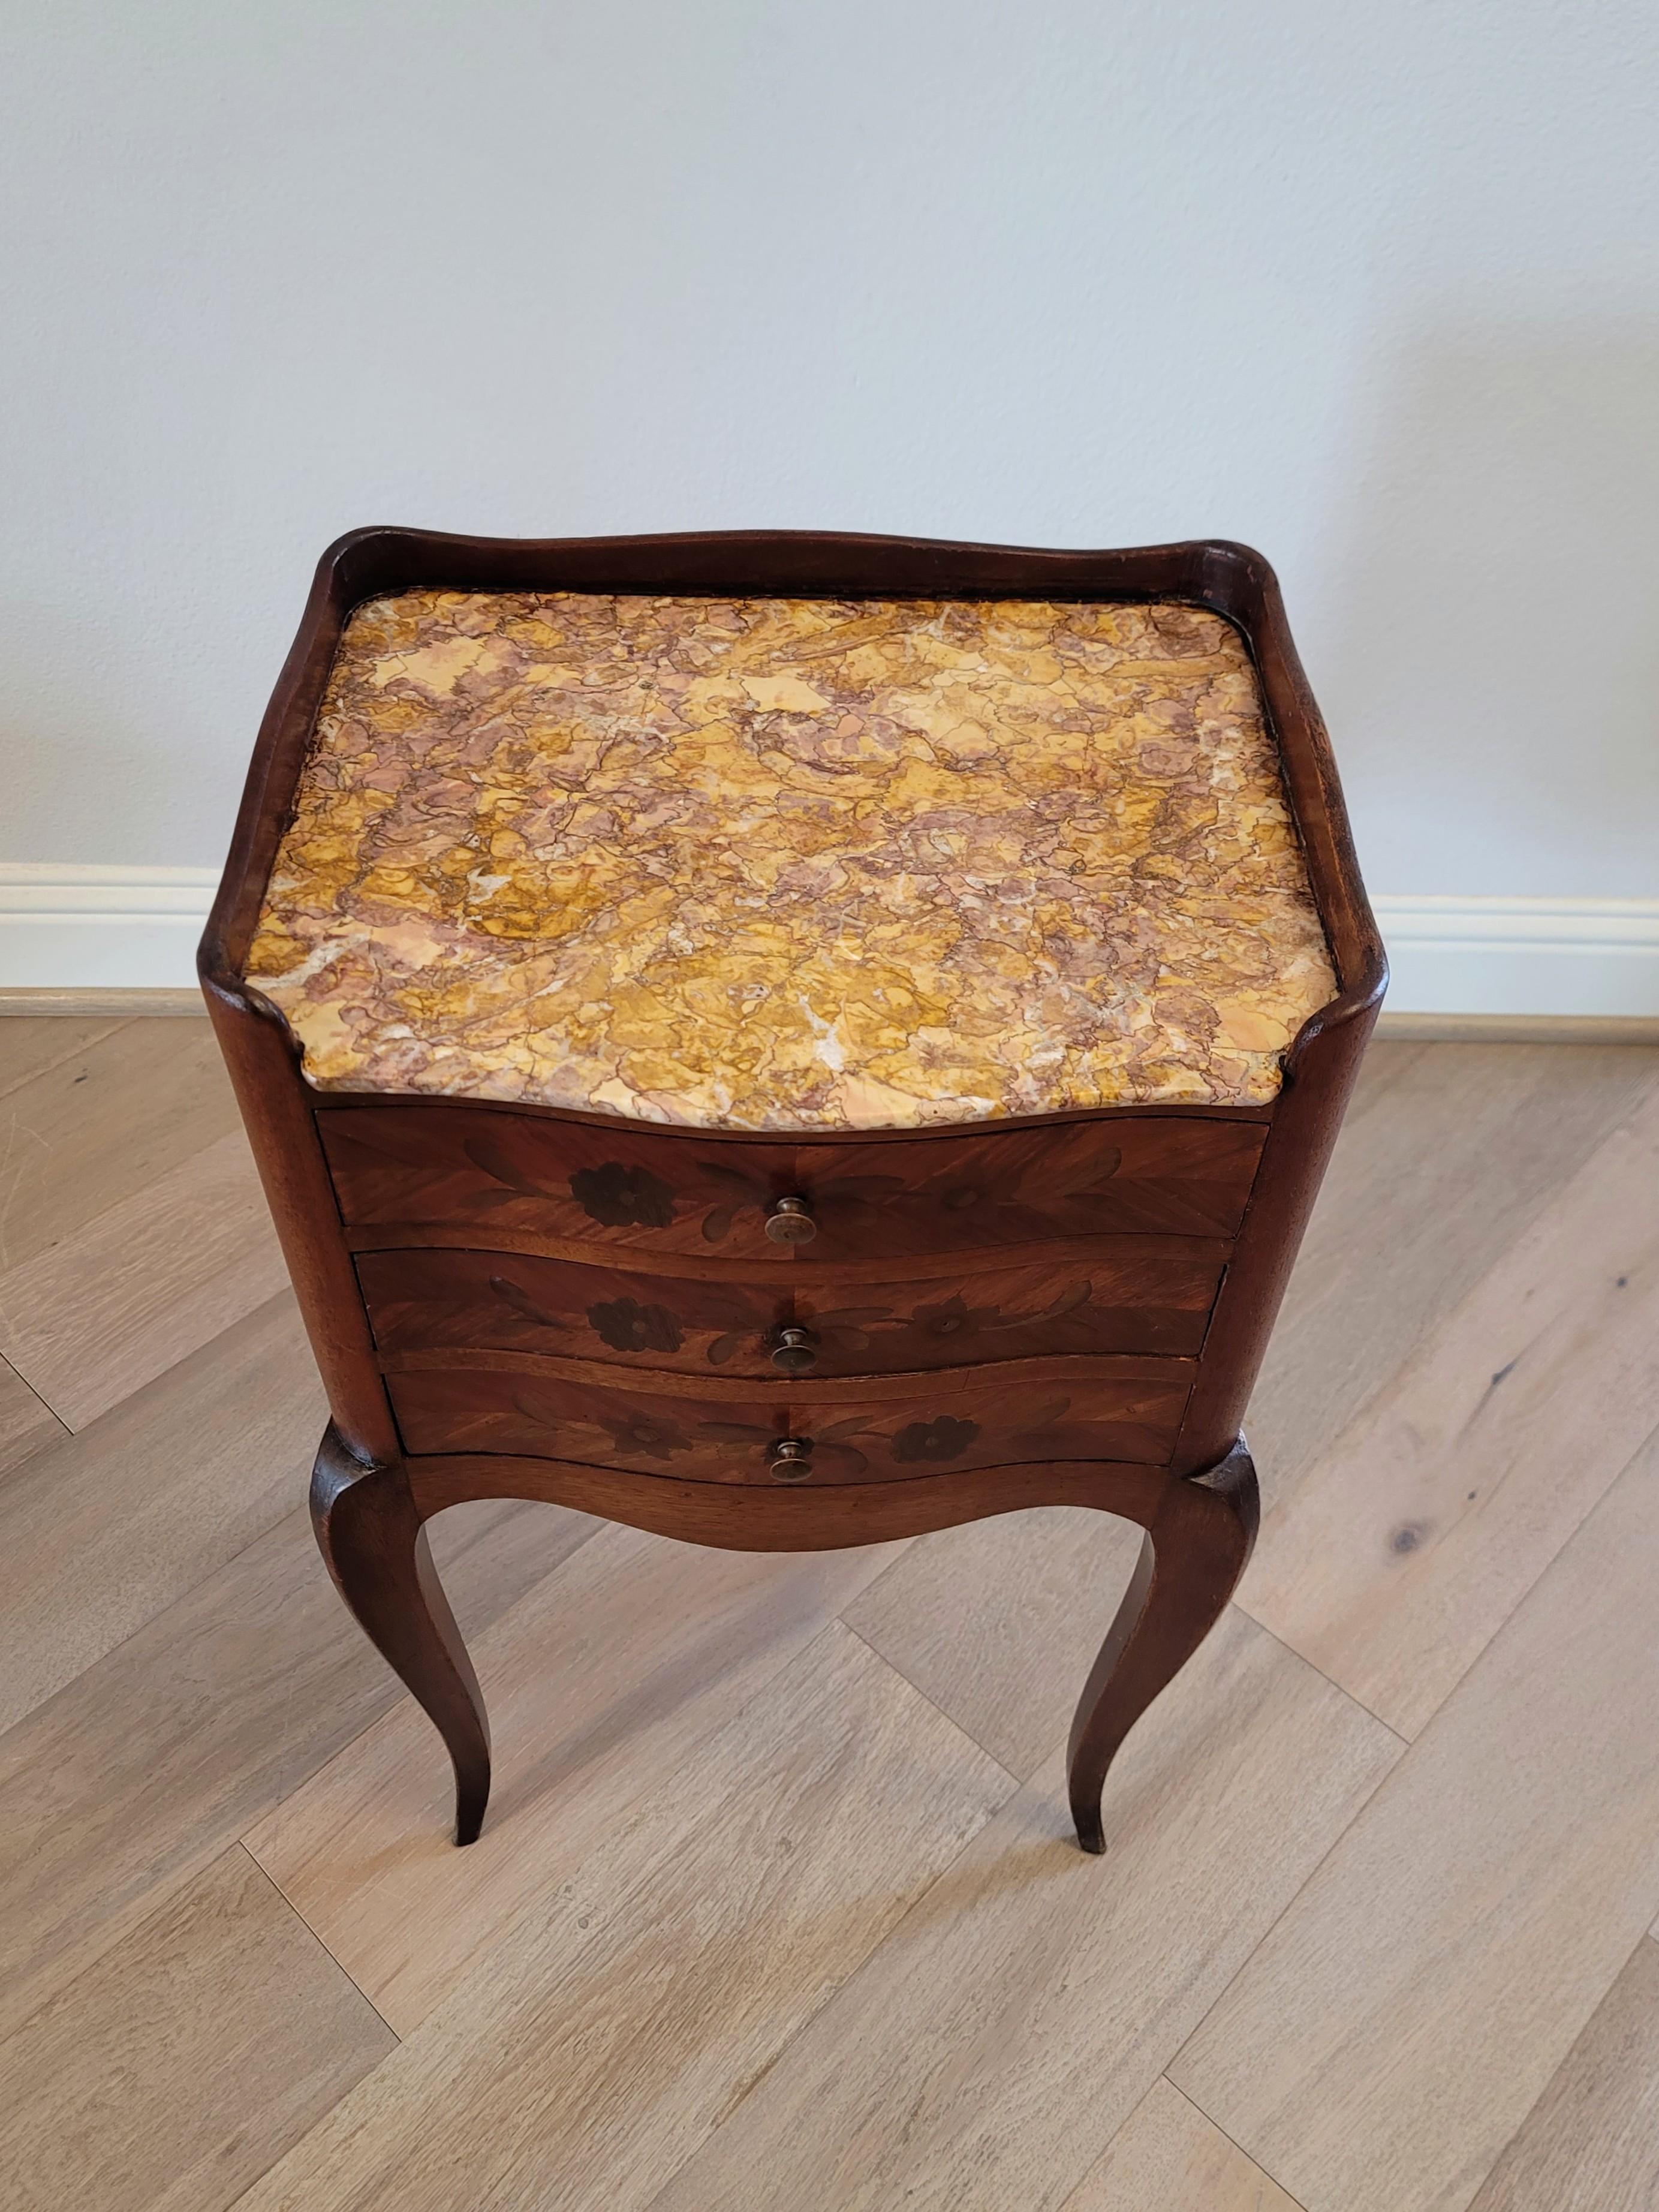 19th Century French Louis XV Style Marquetry Inlaid Nightstand Table For Sale 1